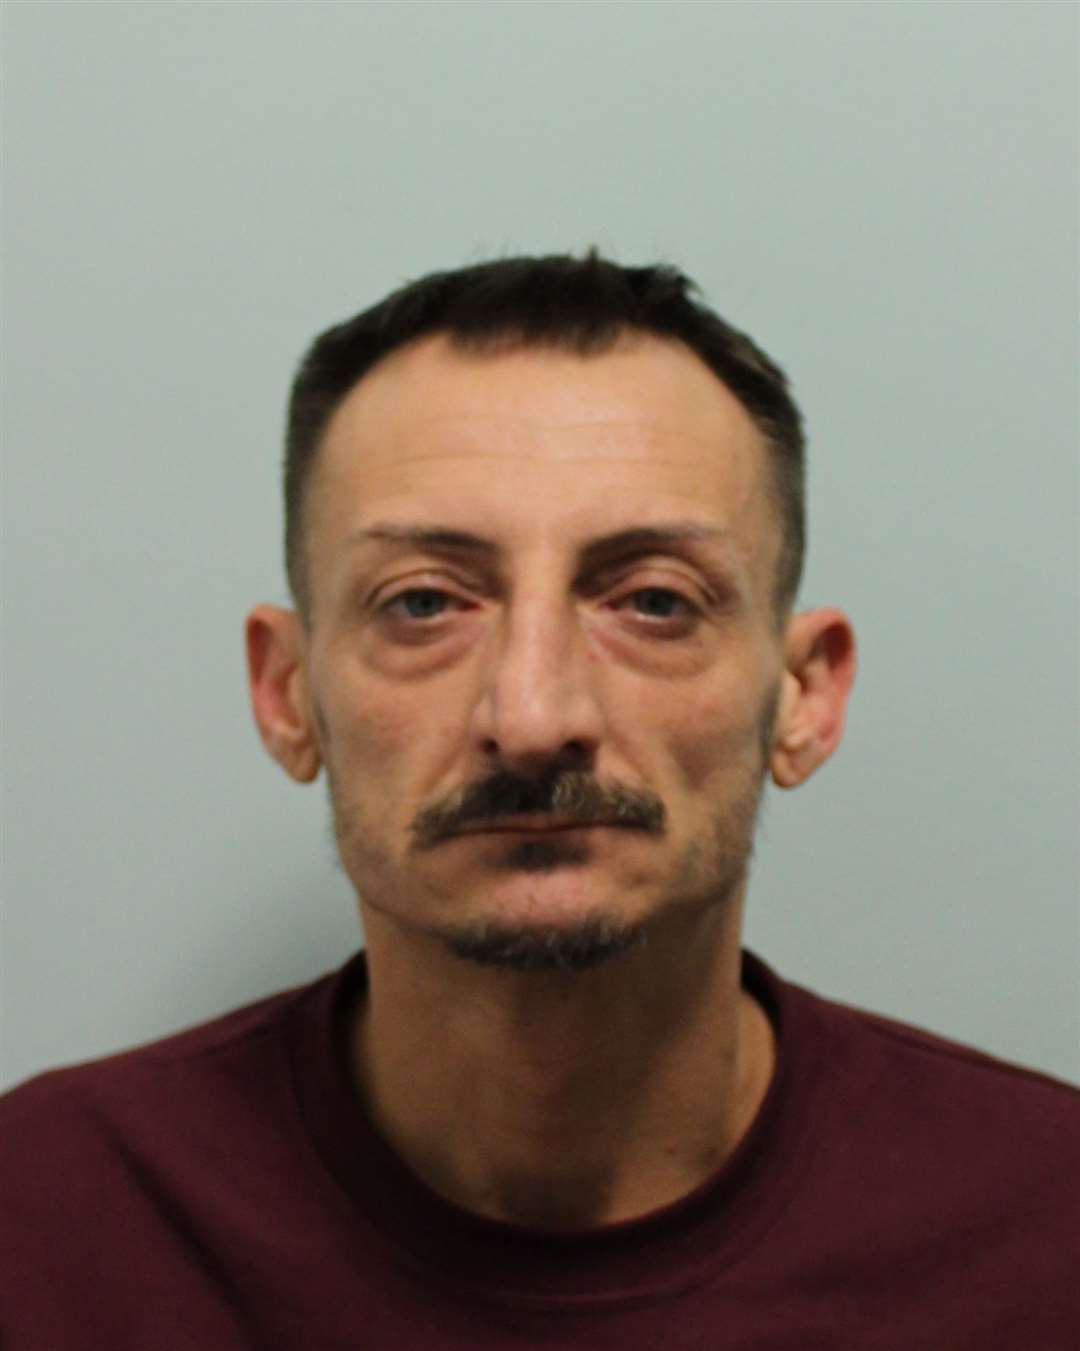 Alessandro Maltese, from Milan in Italy, has been jailed for burgling several celebrities' homes in London. Picture: Met Police